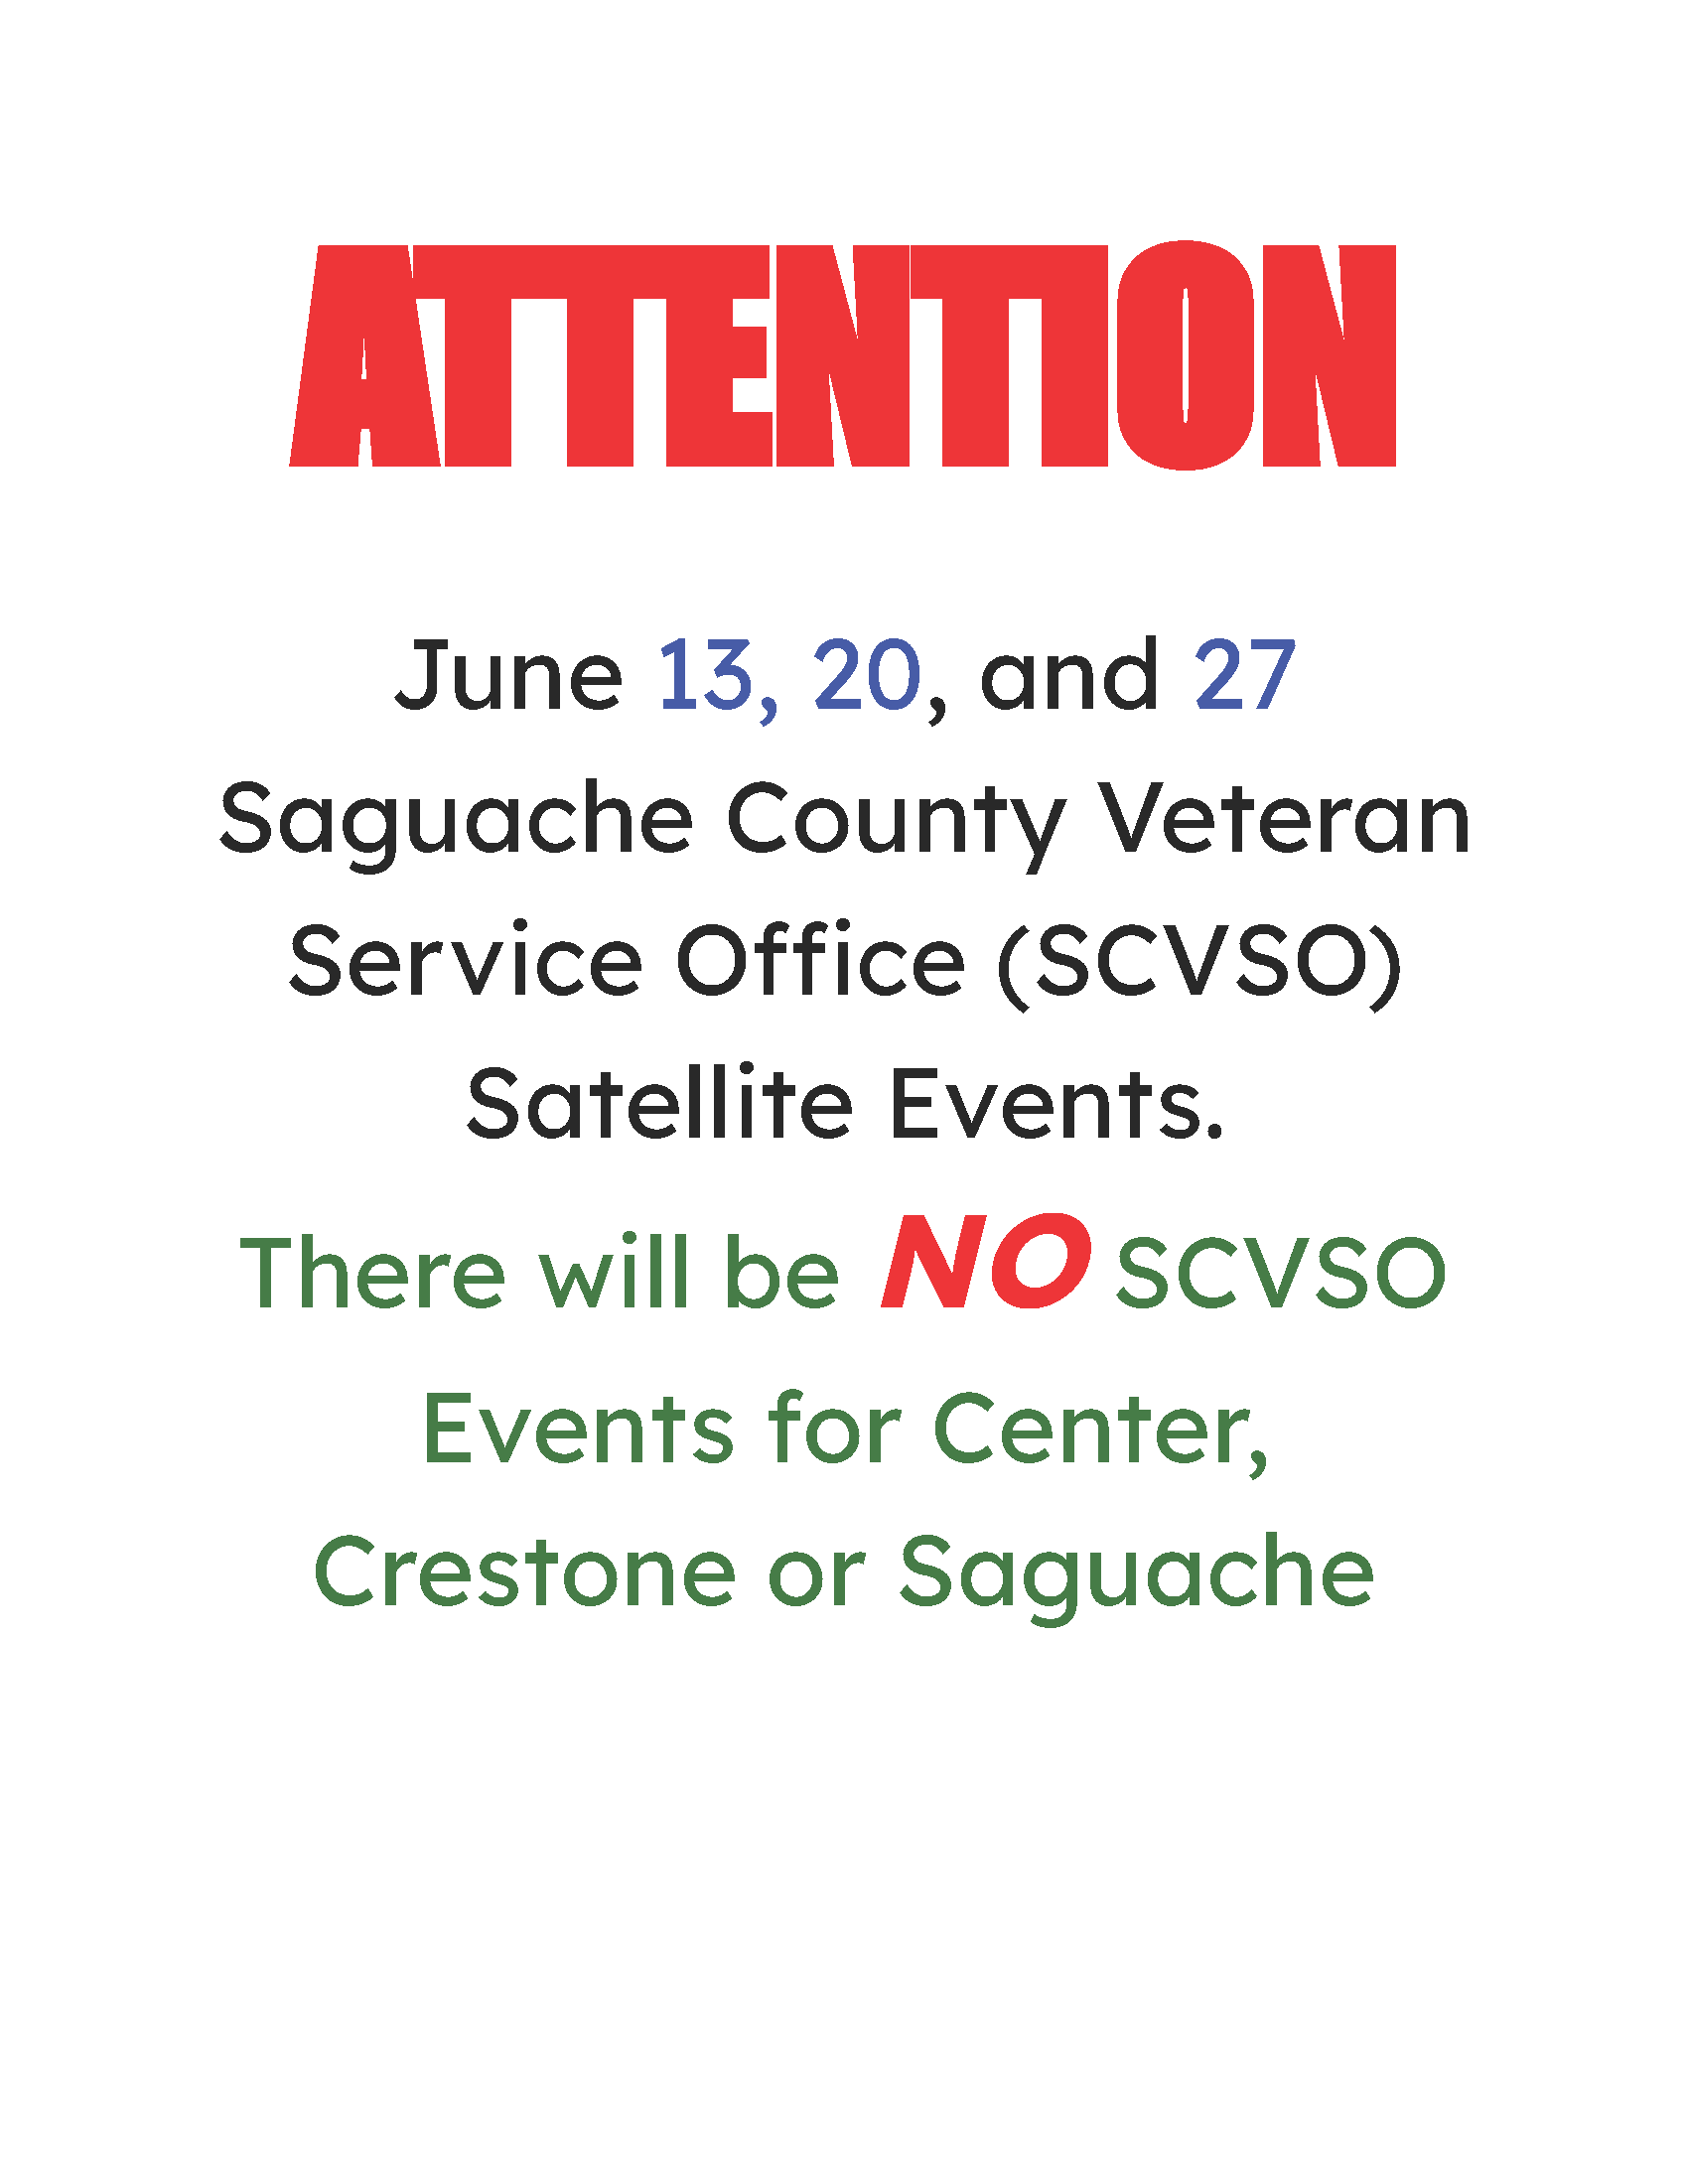 ATTENTION  June 13, 20, and 27 Saguache County Veteran Service Office (SCVSO) Satellite Events. There will be NO SCVSO Events for Center, Crestone or Saguache